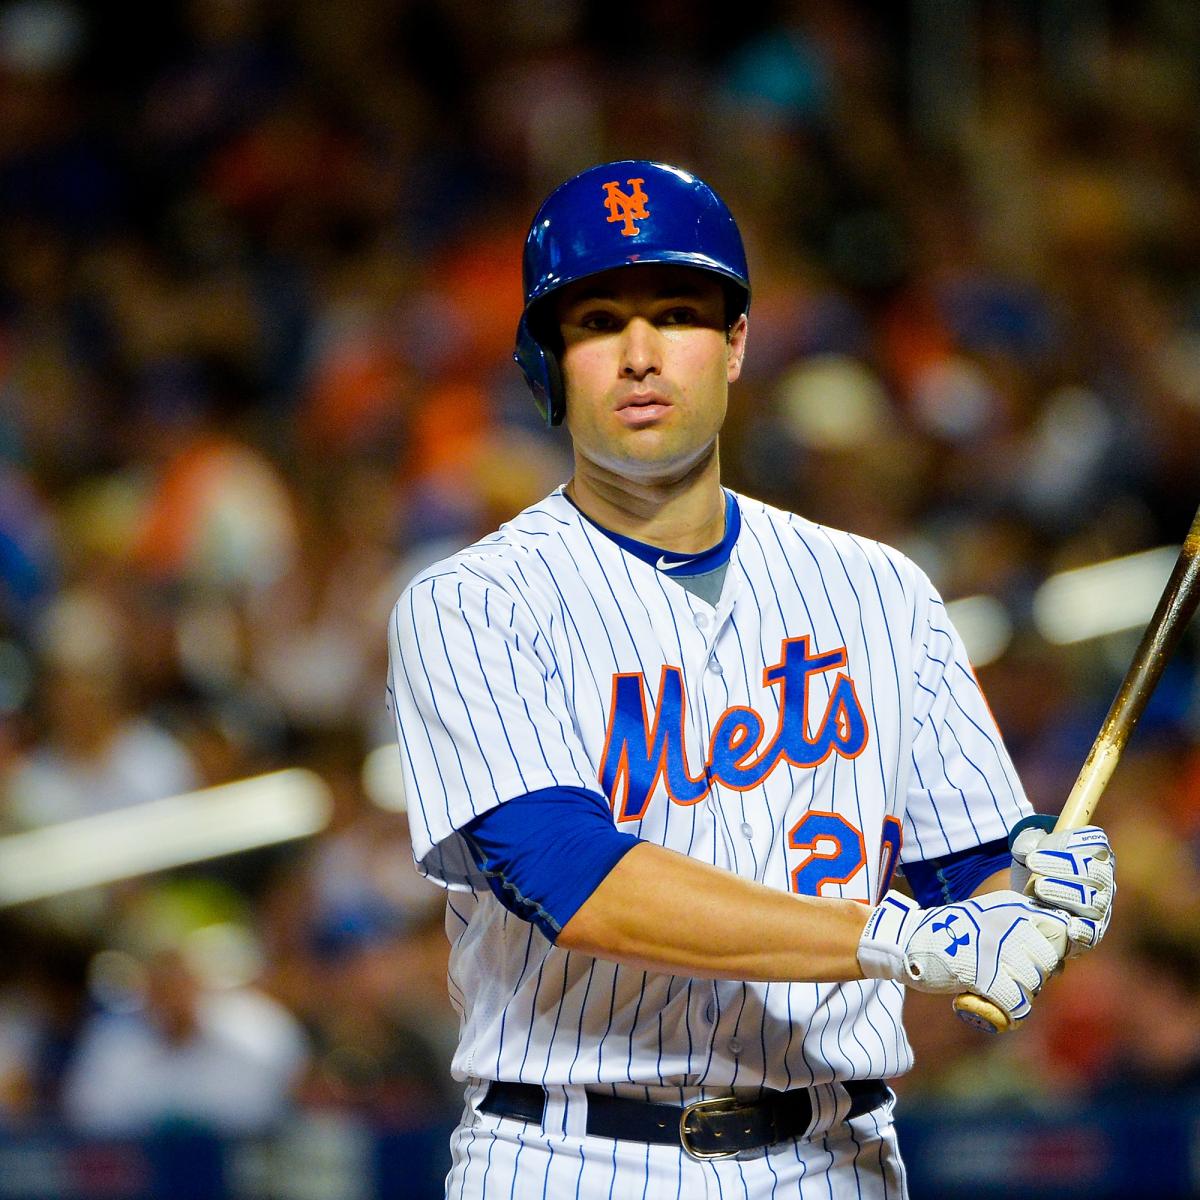 Post-retirement, Neil Walker Reflects on Living Out His Baseball